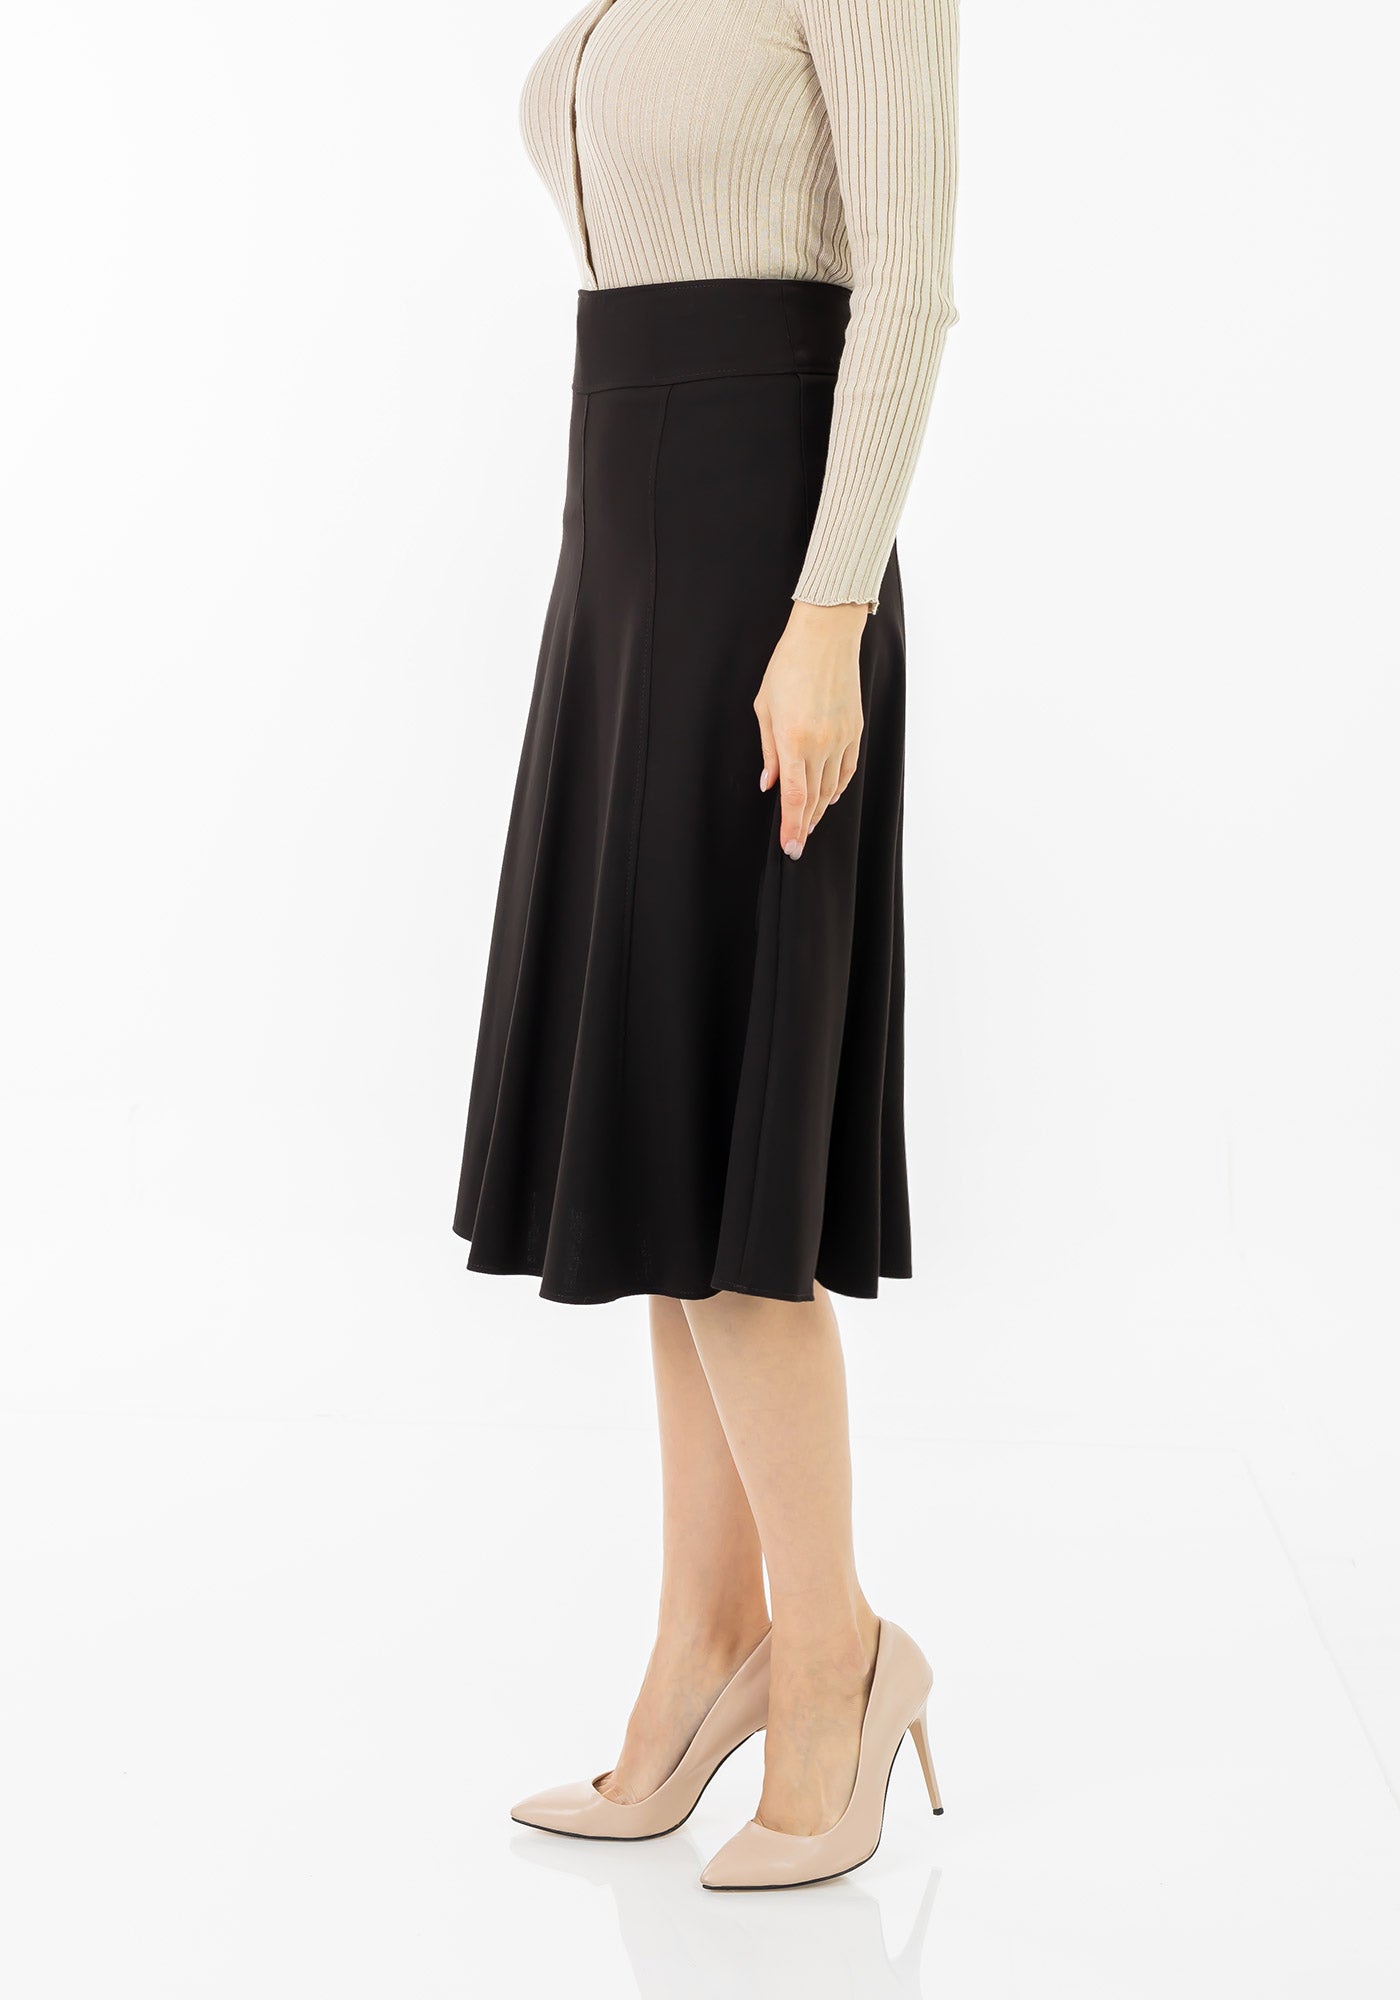 Dark Brown Eight Gore Calf Length Midi Skirt for Every Occasion G-Line